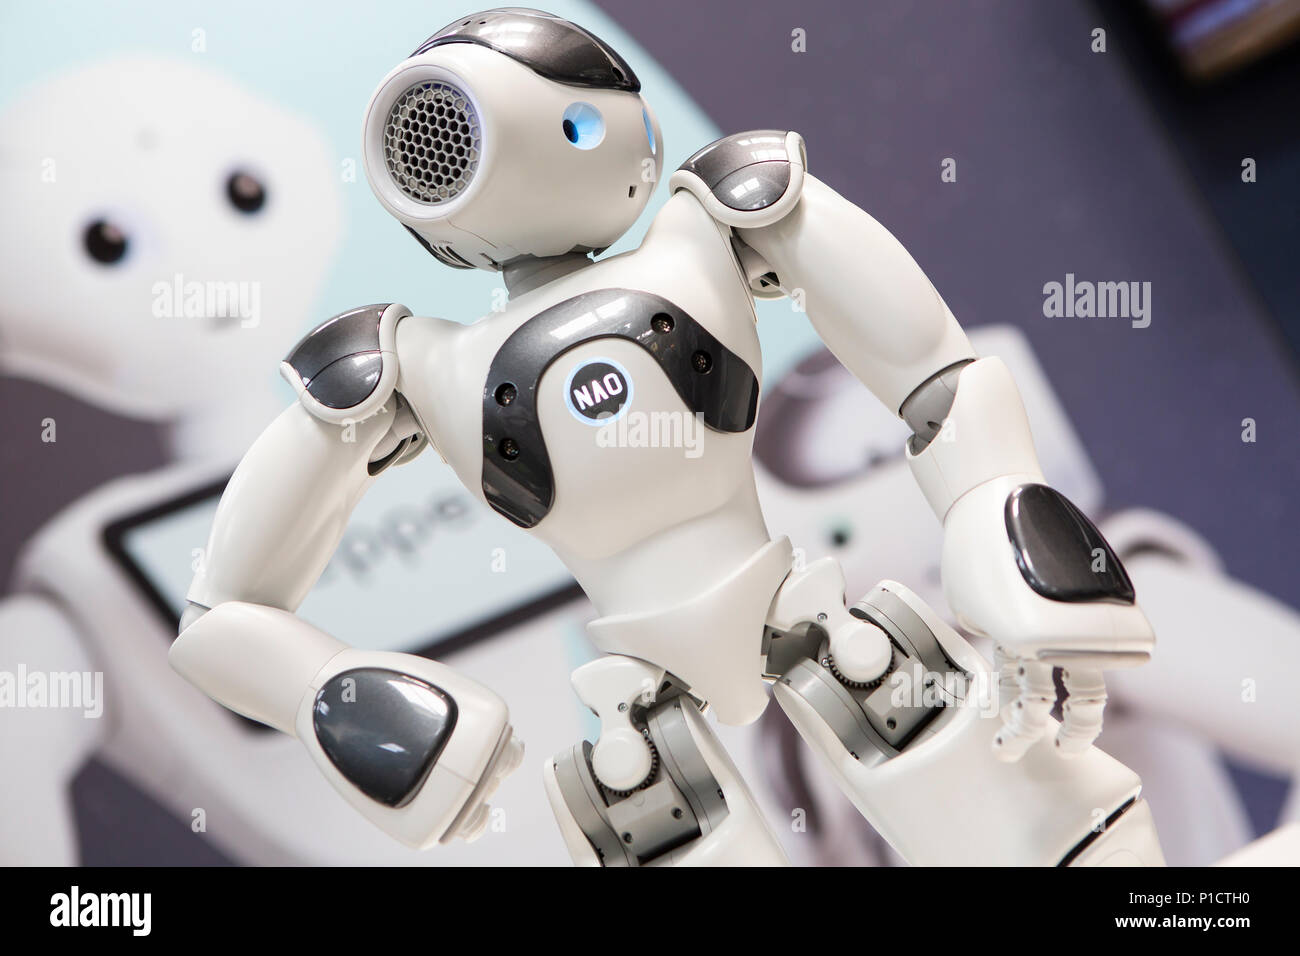 Hannover, Germany. 11th June, 2018. CEBIT 2018, international computer expo and Europe's Business Festival for Innovation and Digitization: NAO 6, interactive humanoid robot manufactured by company SoftBank Robotics. Credit: Christian Lademann/Alamy Live News Stock Photo